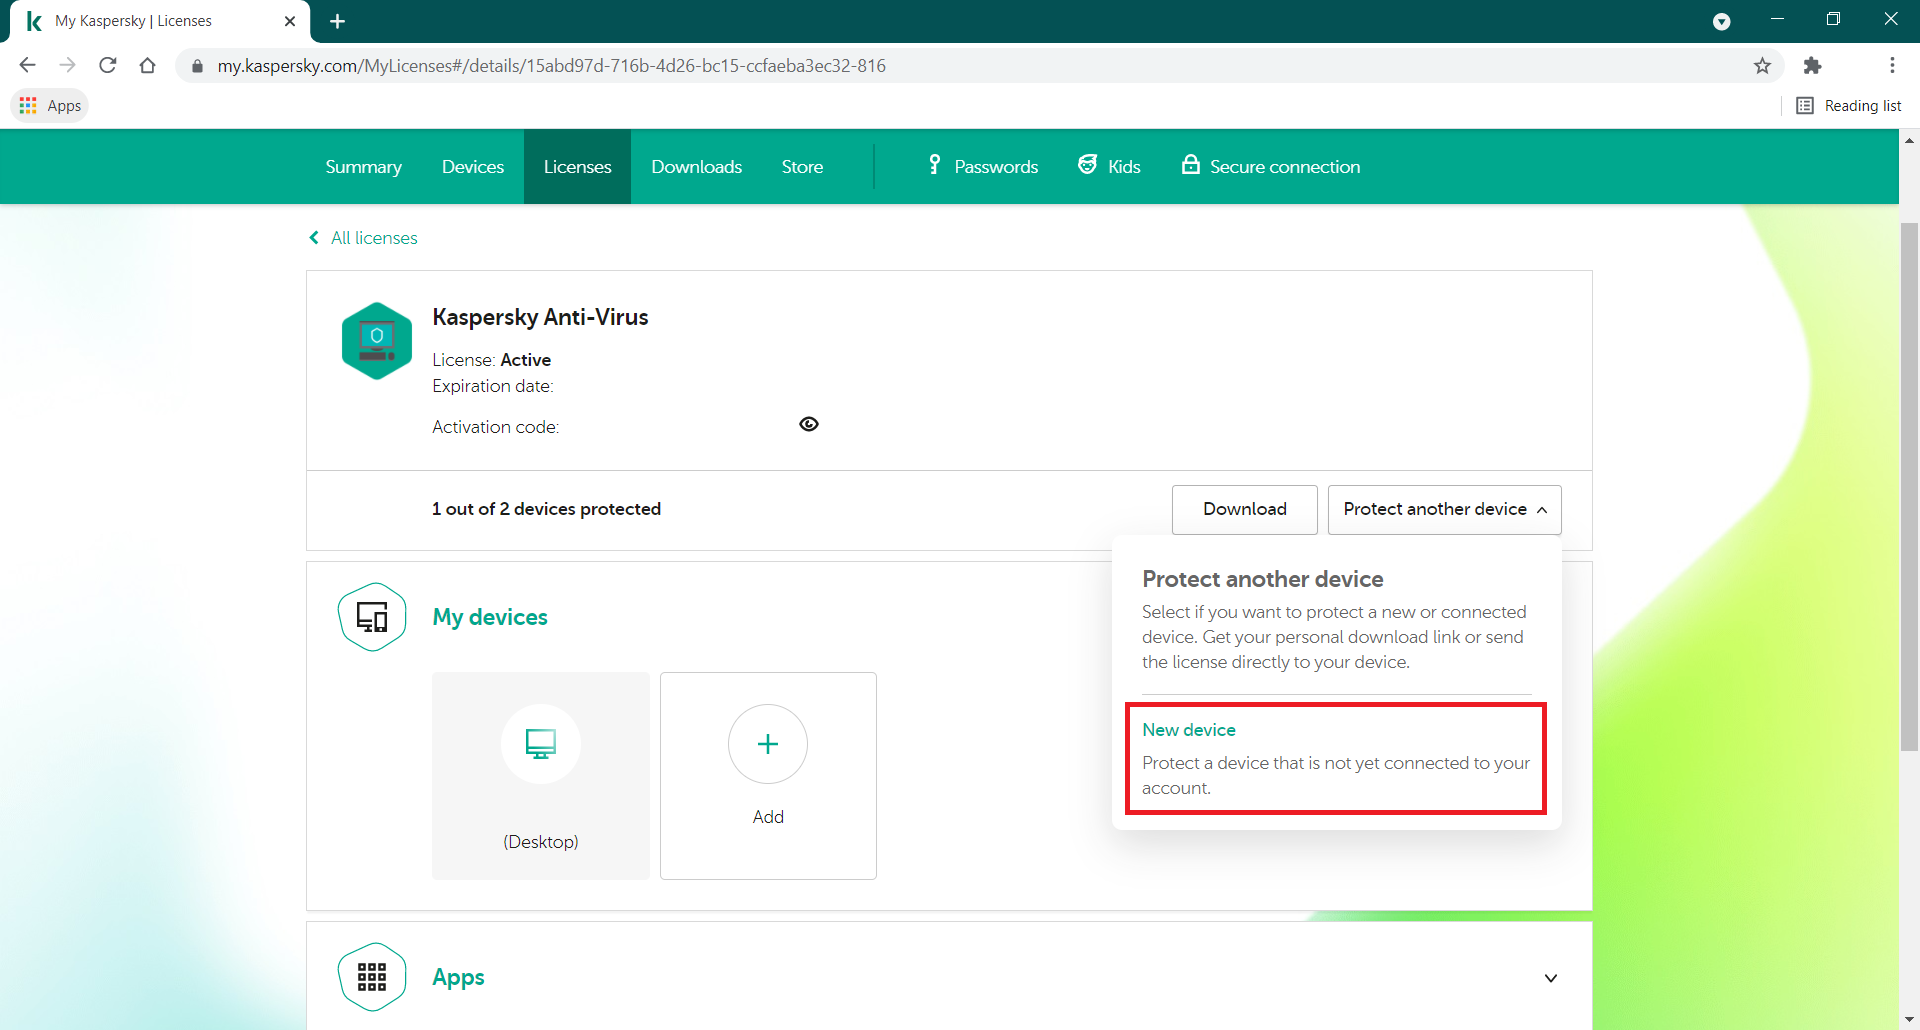 how-to-add-new-devices-kaspersky-licence-screen-3-EN